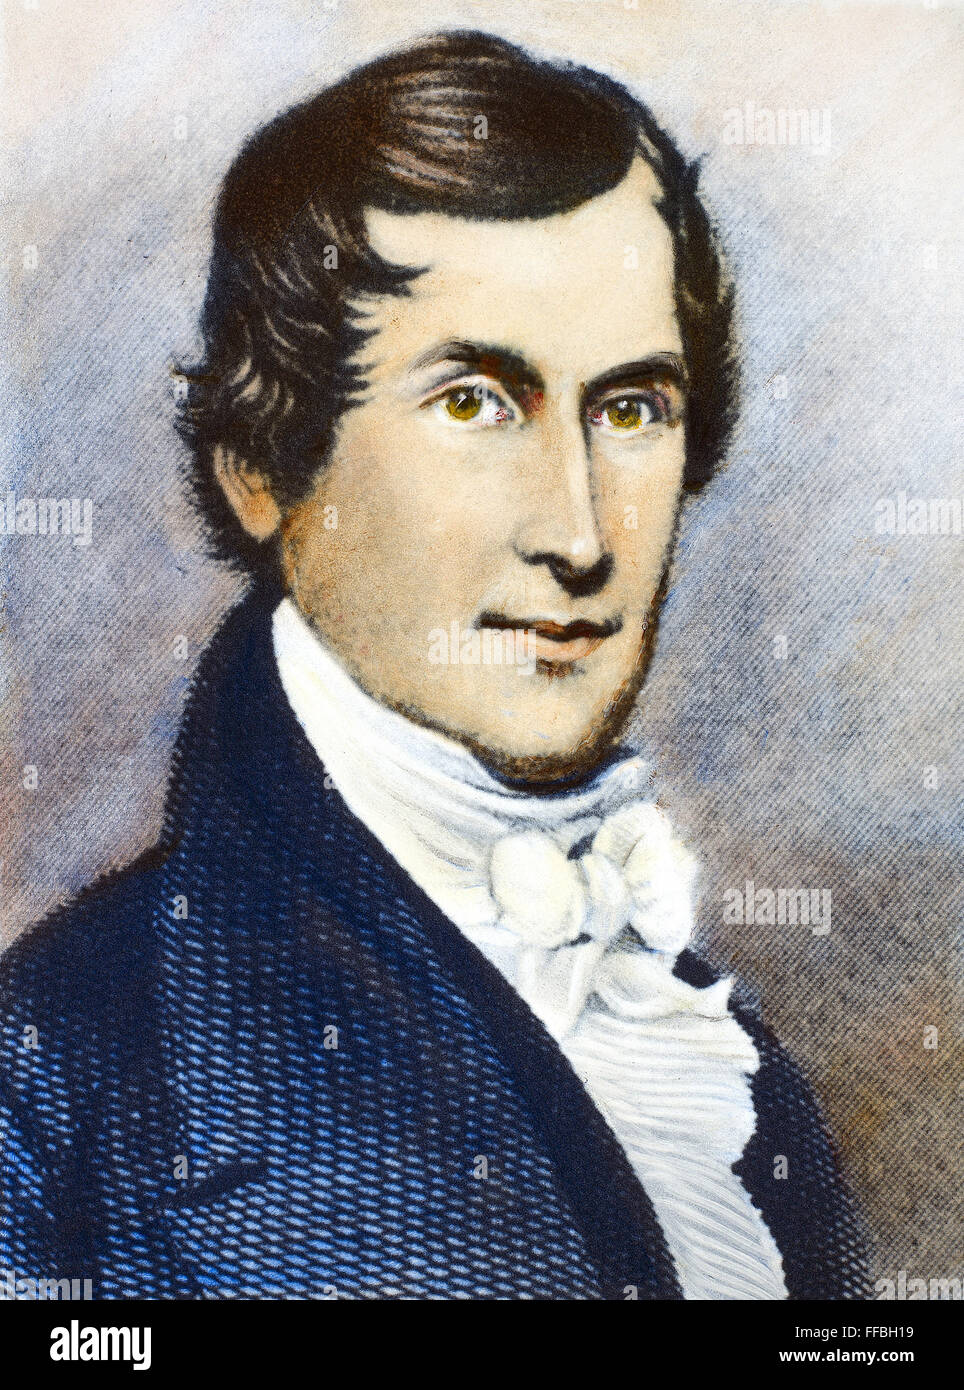 CANVASS WHITE (1790-1834). /nAmerican engineer. Line engraving, 19th century. Stock Photo